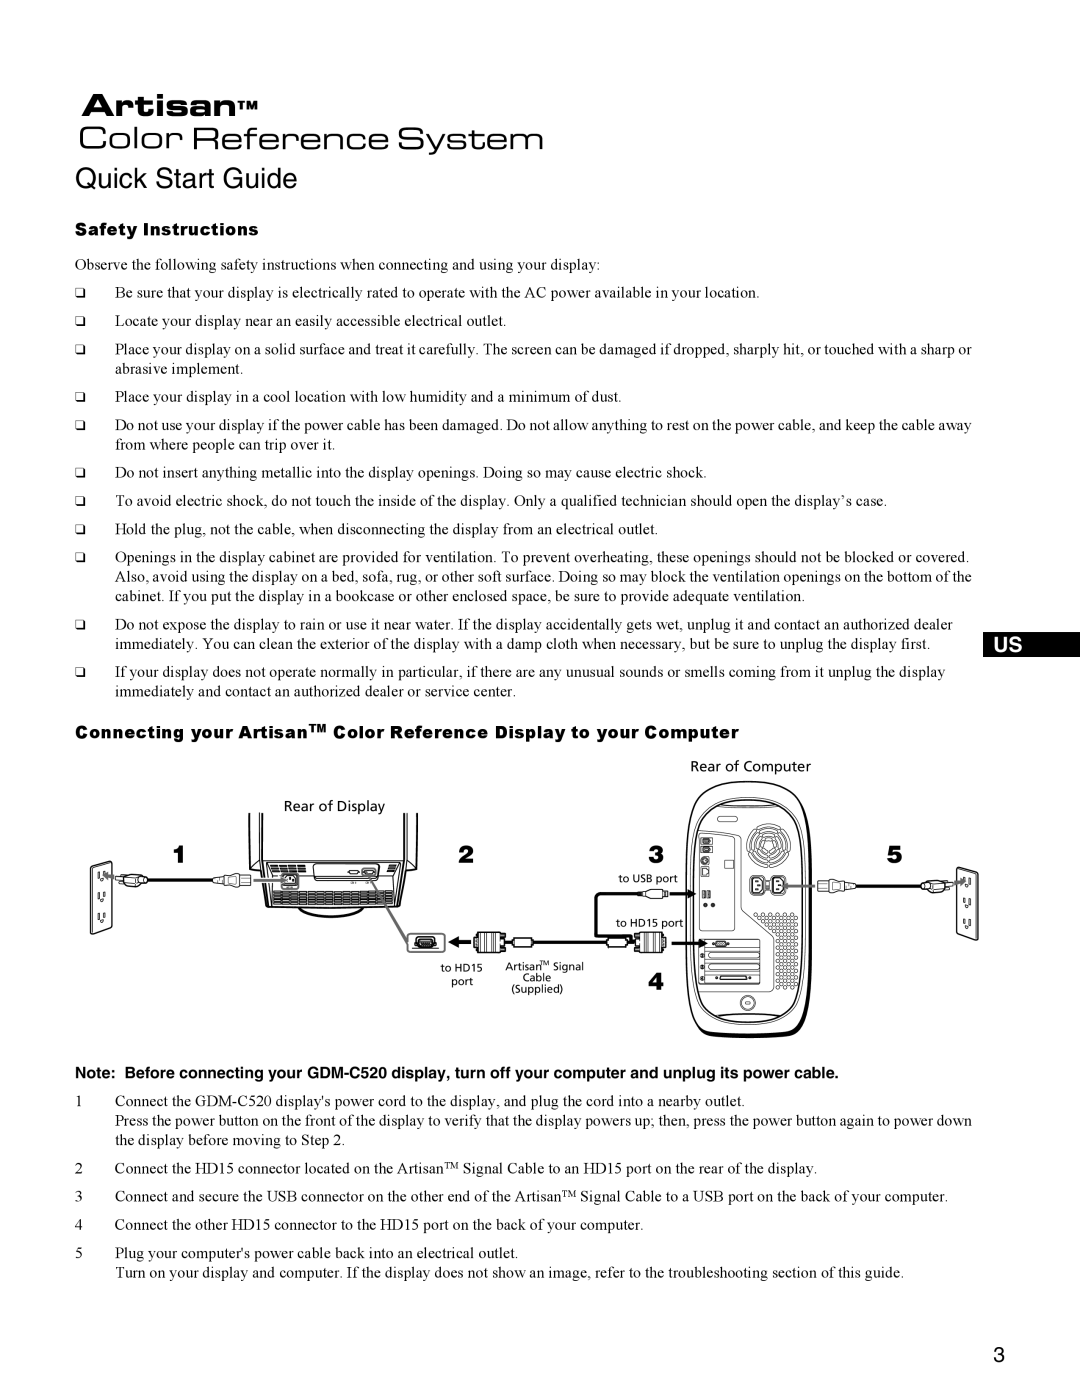 Sony GDM-C250K Quick Start Guide, Safety Instructions, Connecting your ArtisanTM Color Reference Display to your Computer 